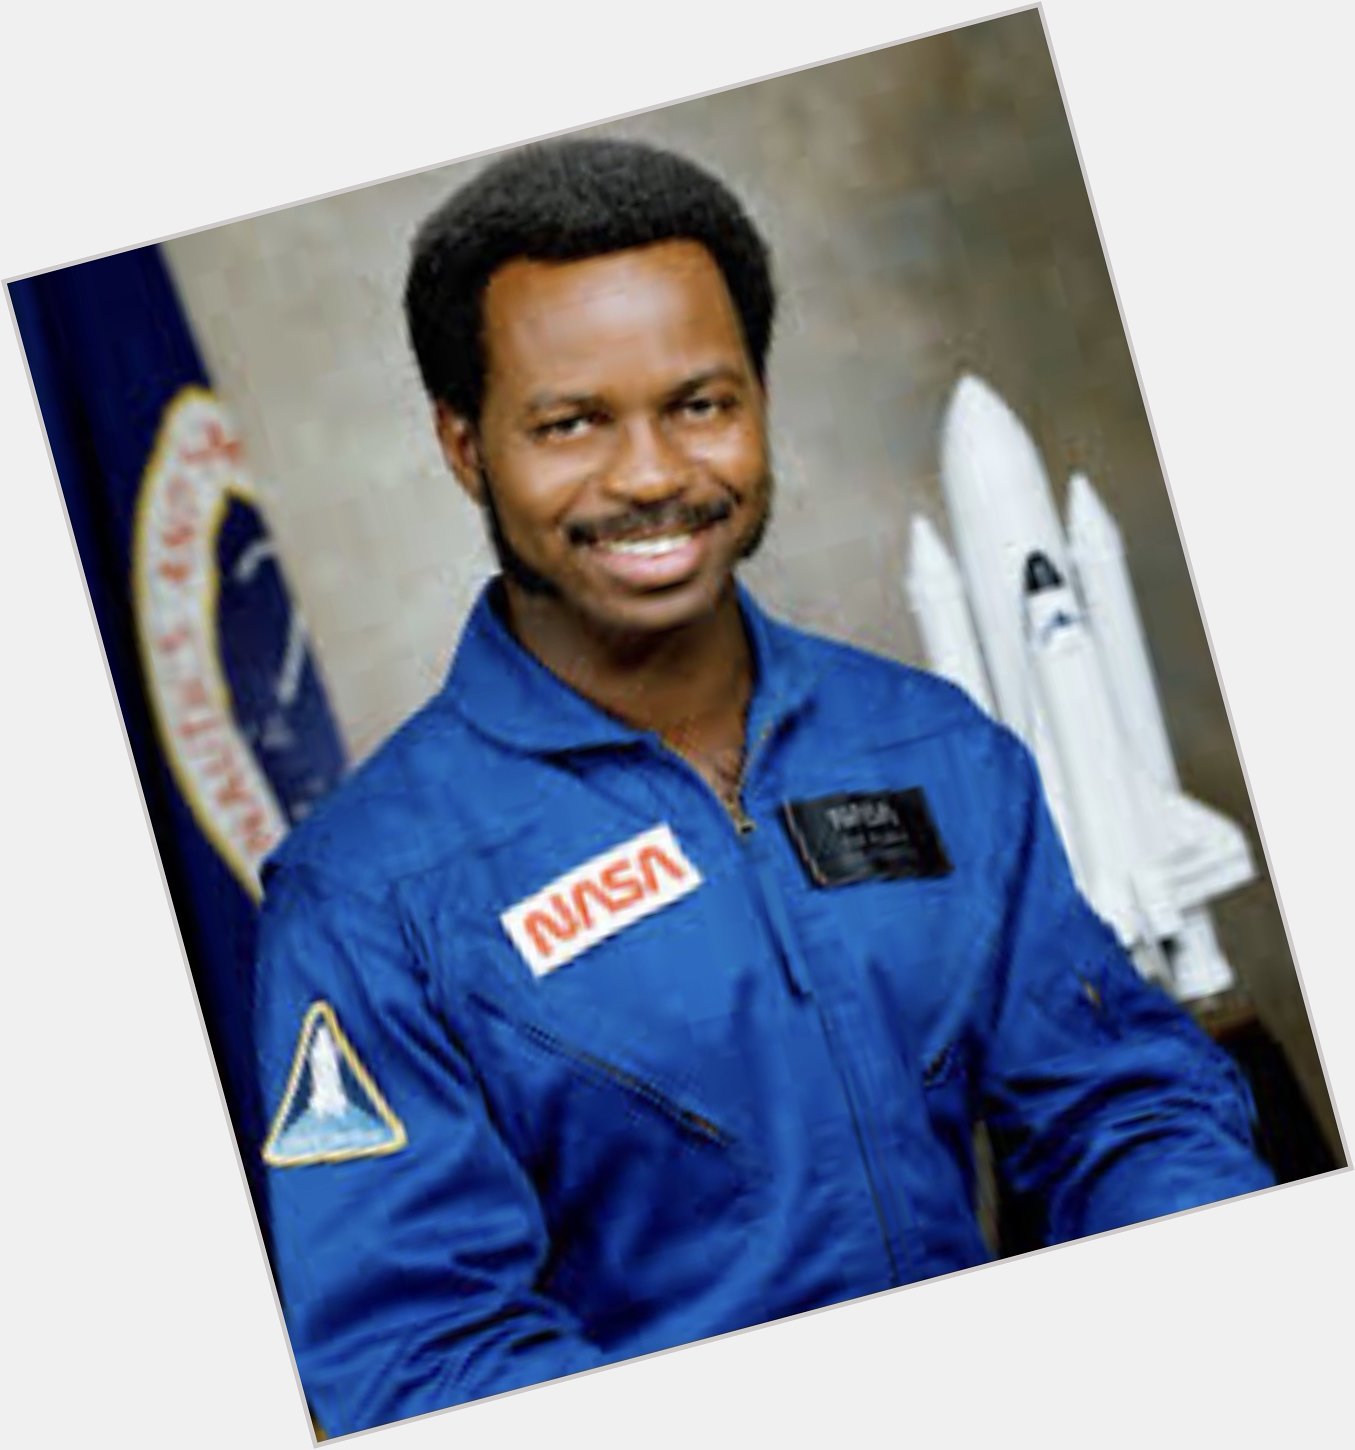 Happy birthday to astronaut and physicist Ronald McNair who would have been 71 today. 